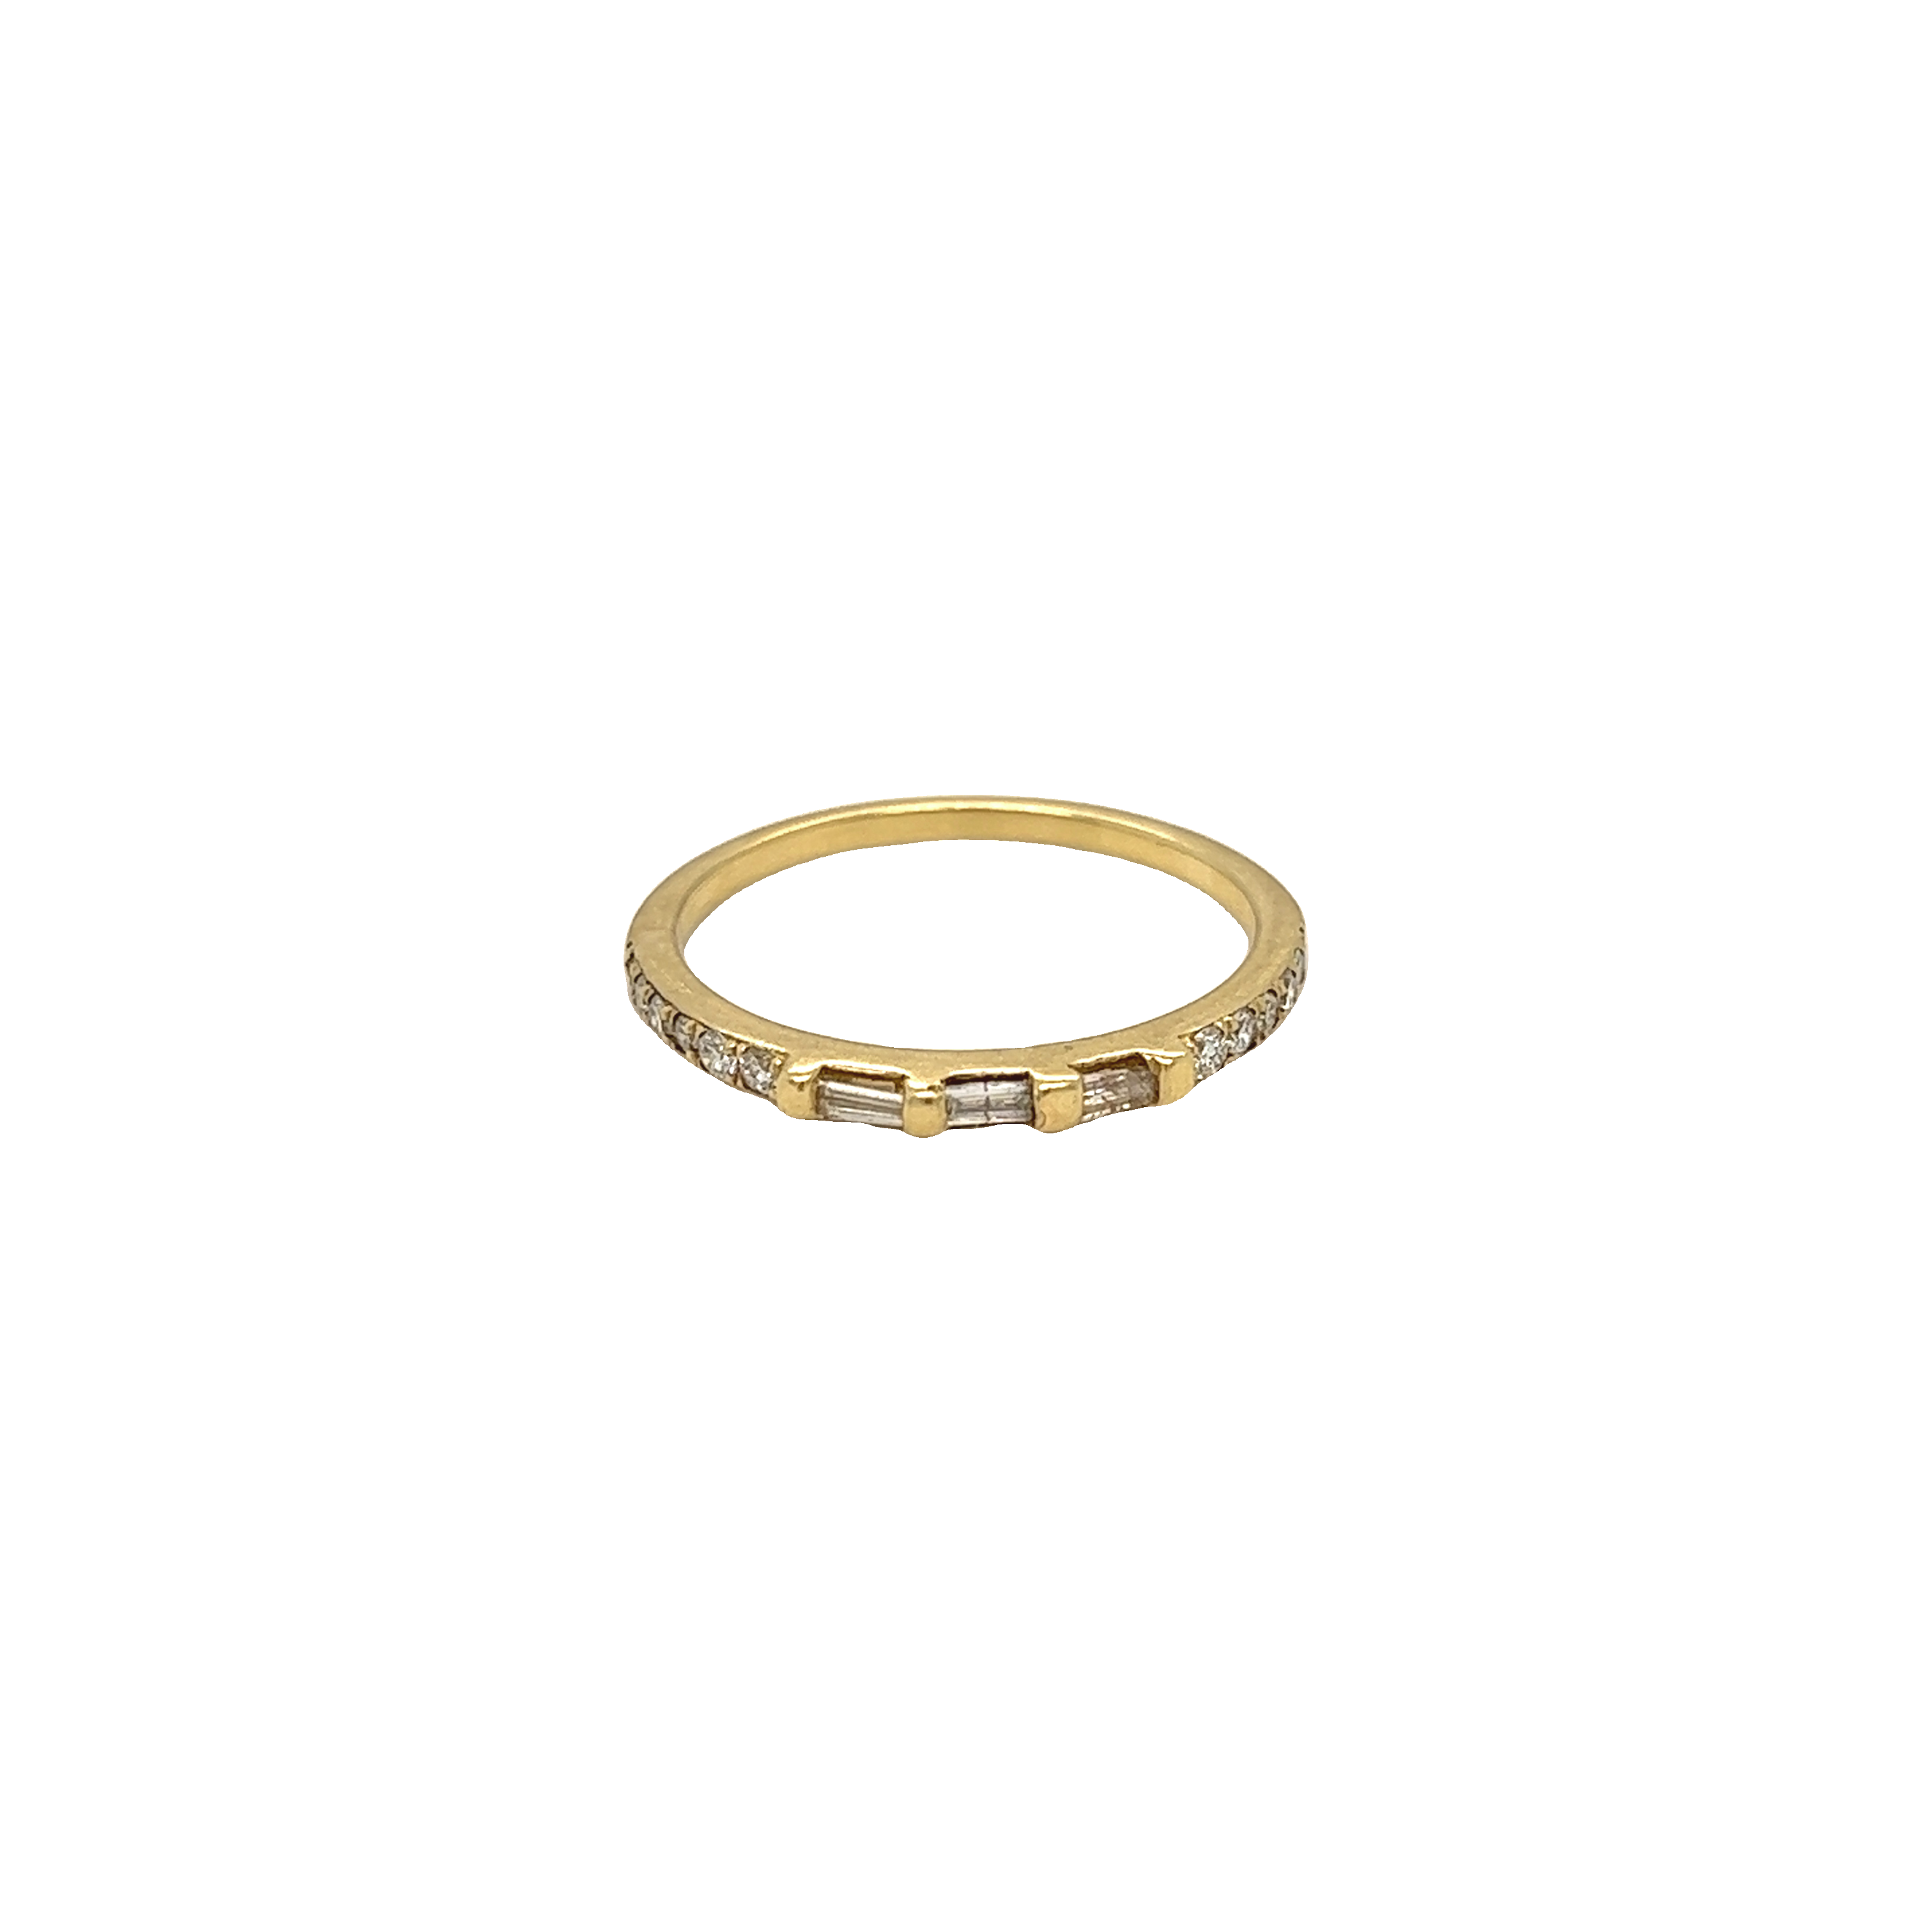 Featured image for “Diamond Baguette/Round Stackable Ring”